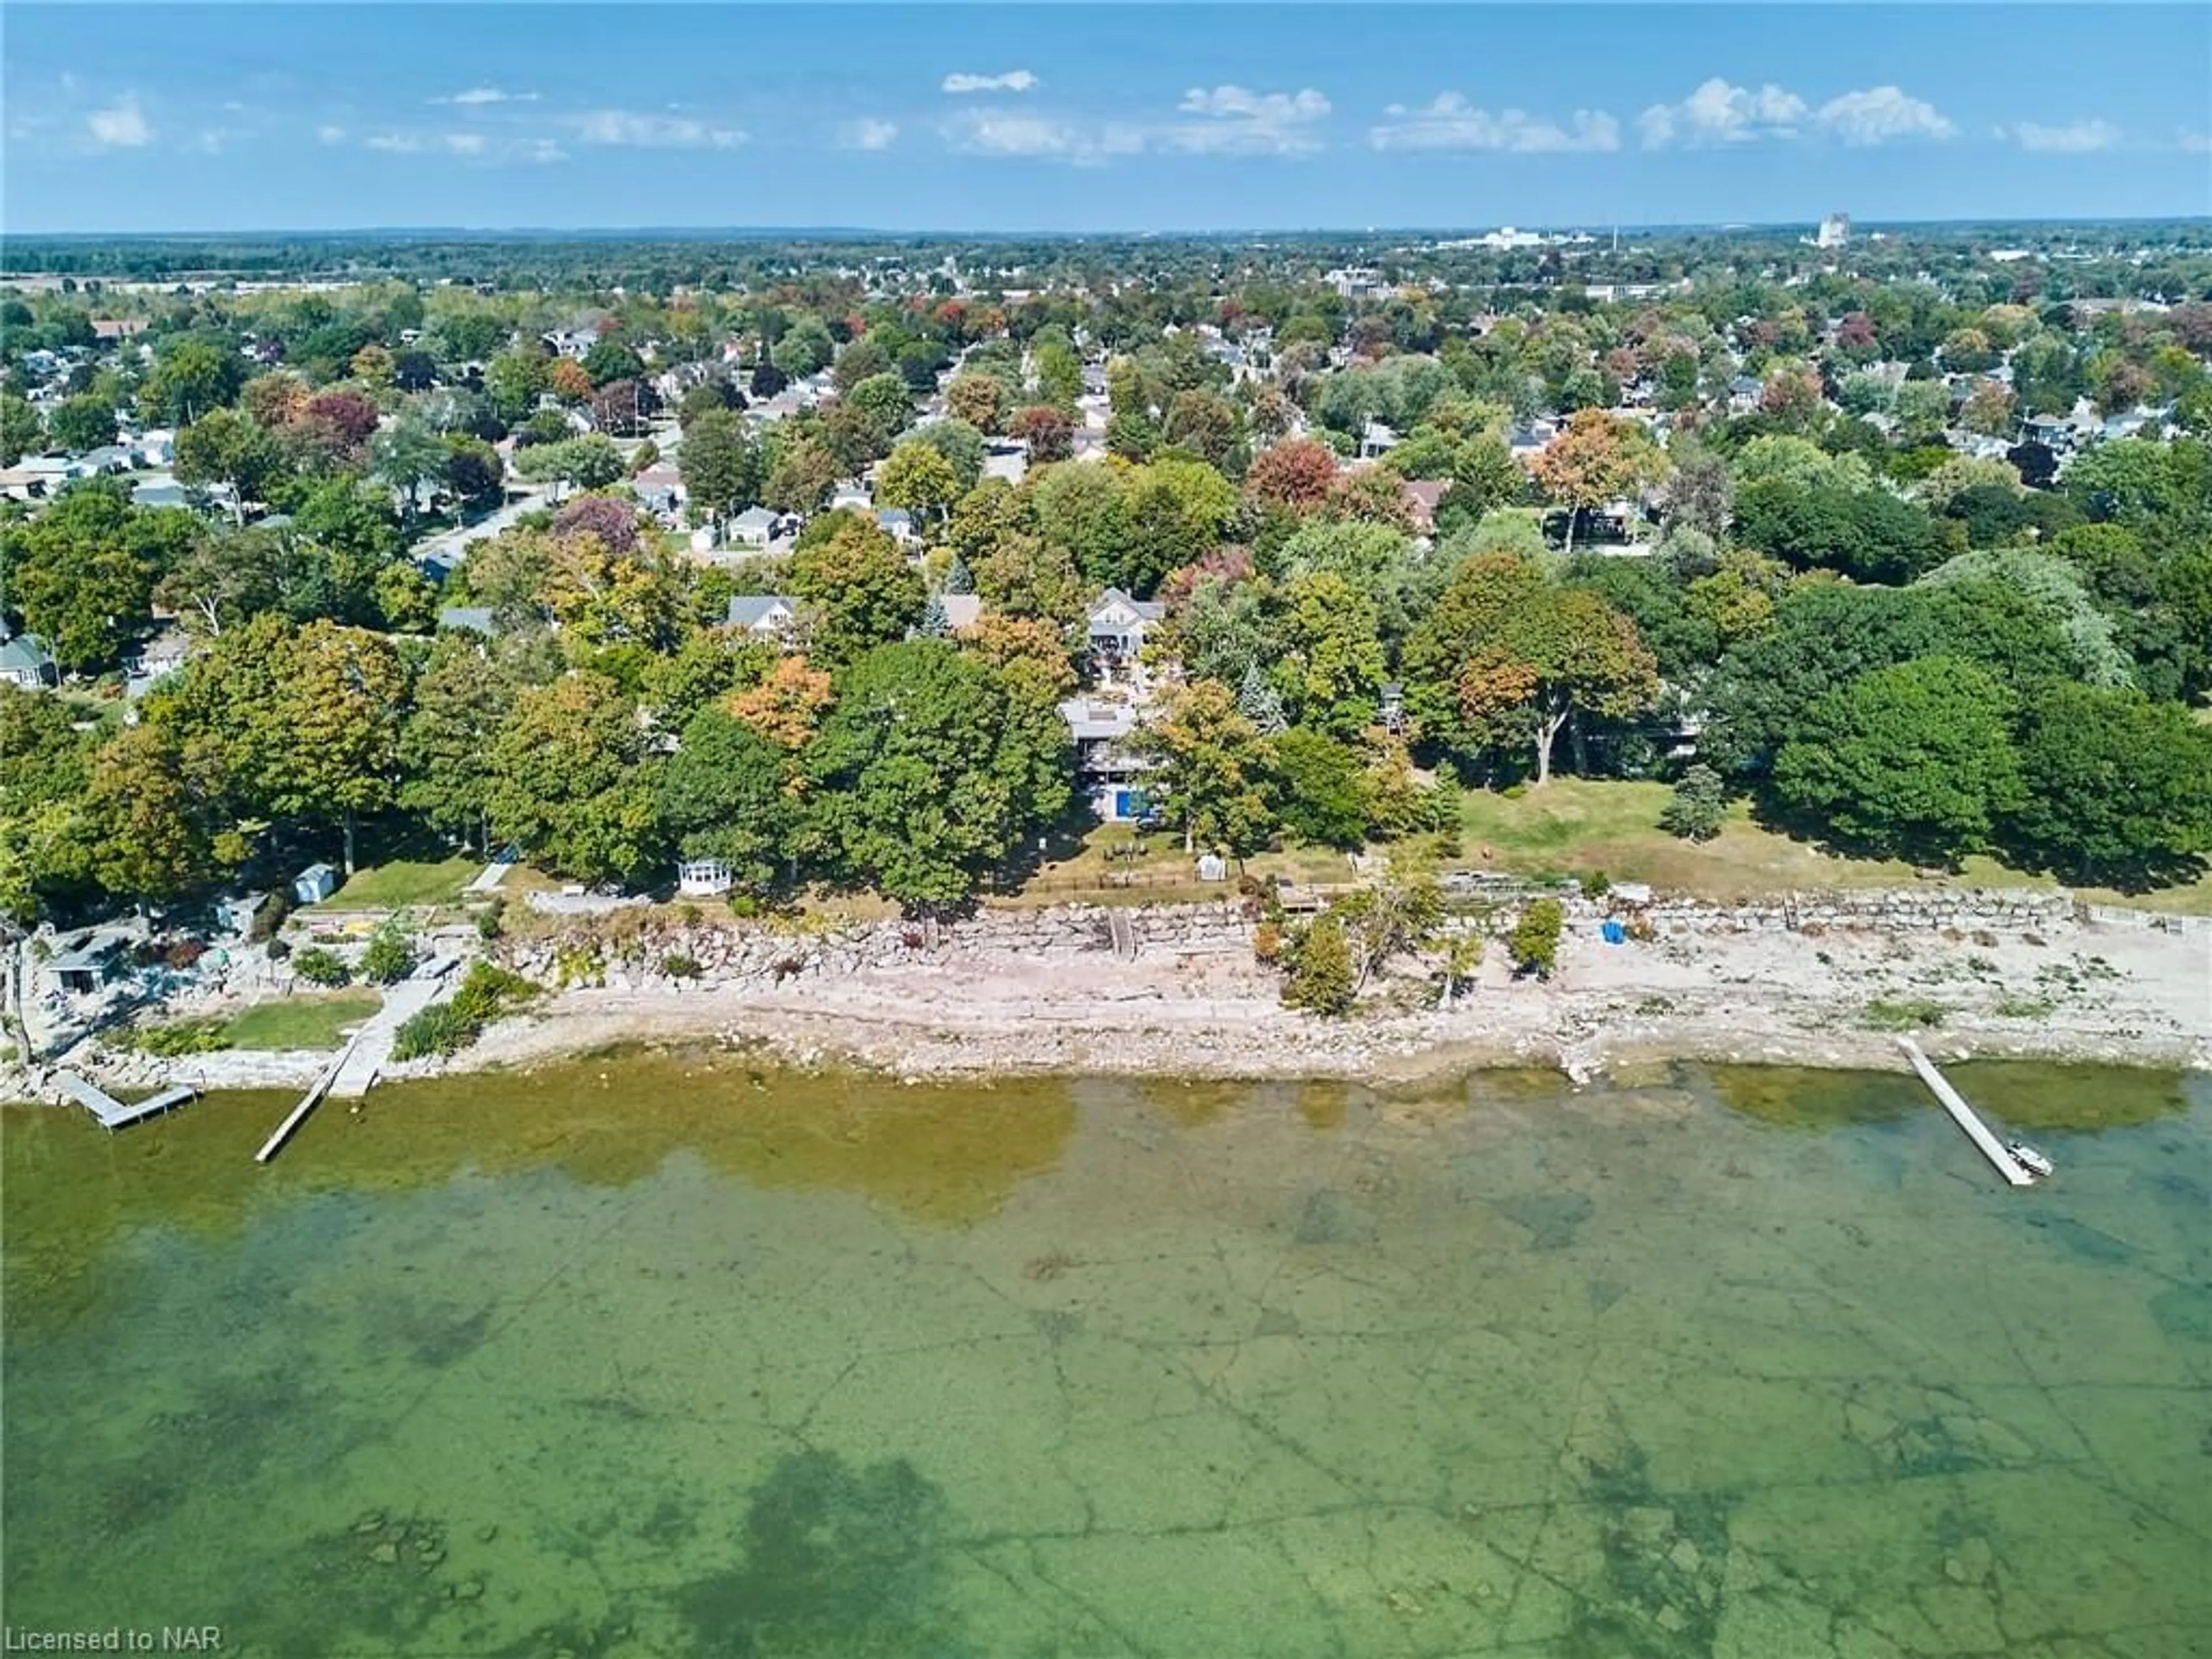 Lakeview for 53 Tennessee Ave, Port Colborne Ontario L3K 2R8